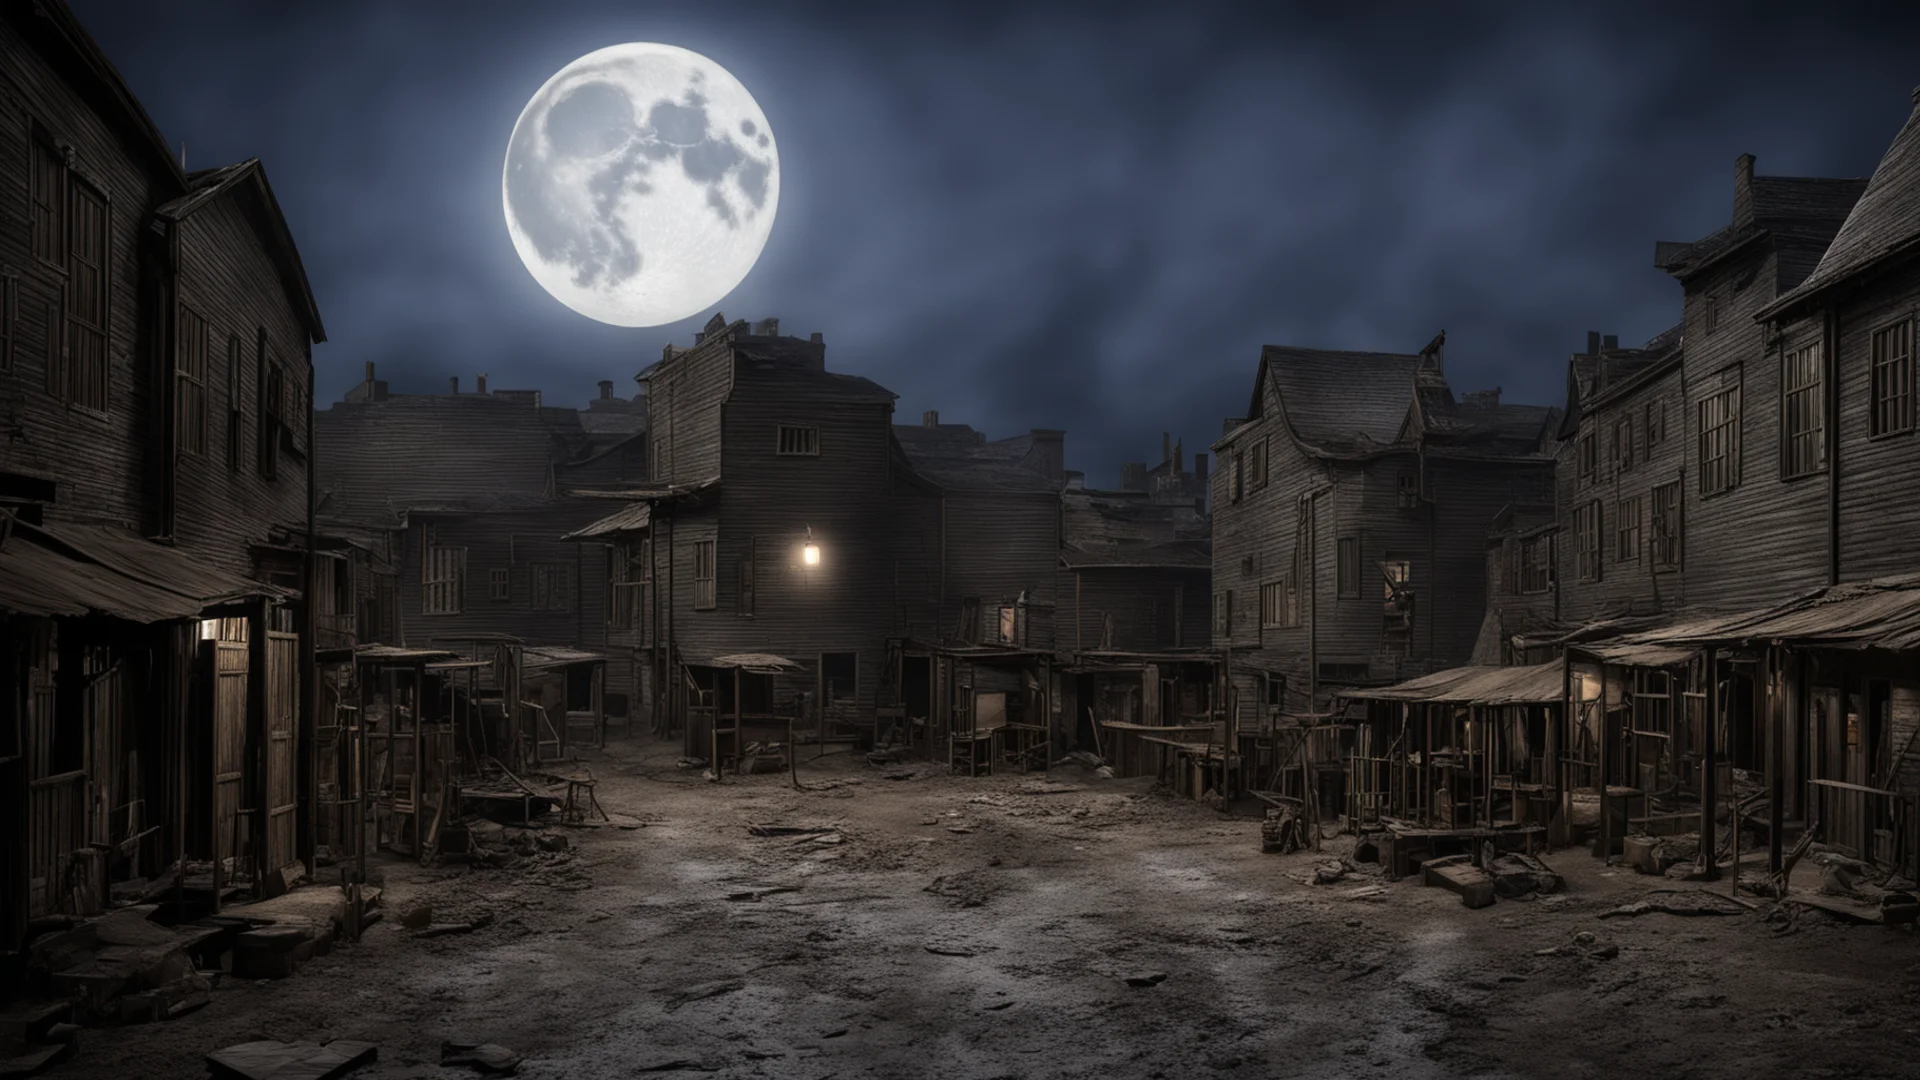 aiold 1800s town realistic detailed reconstruction factory yard muddy streets scary dark large moonlight  confident engaging wow artstation art 3 wide